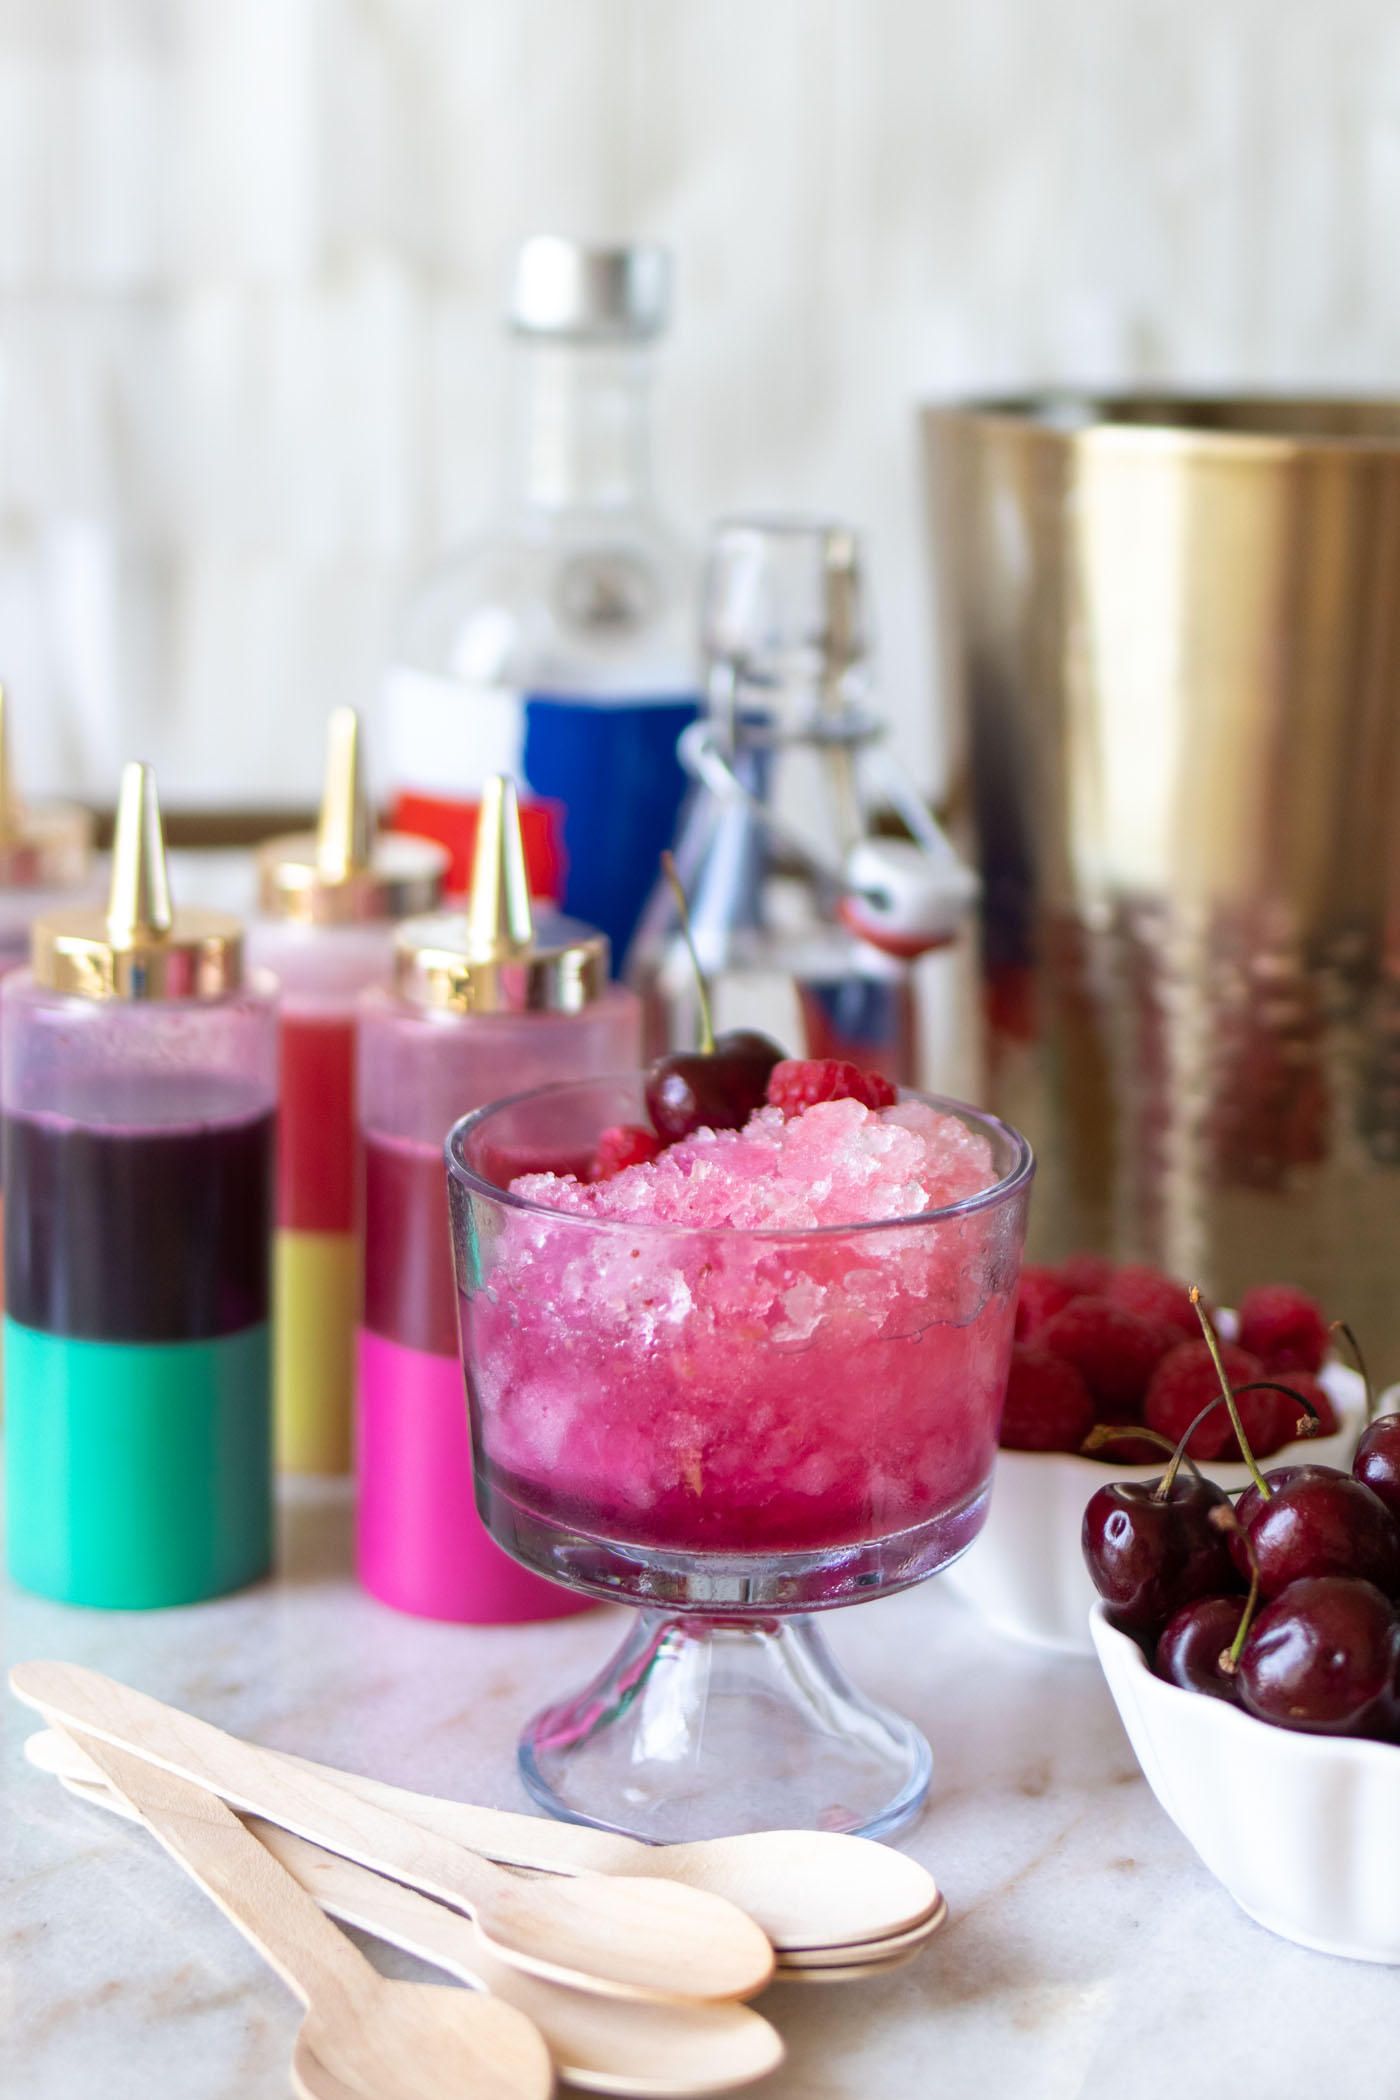 Make Boozy Snow Cones for 4th of July with real fruit snow cone syrups! Use fresh or frozen fruit to make adult snow cones for summer parties // #4thofjuly #snowcones #partyideas #cocktails